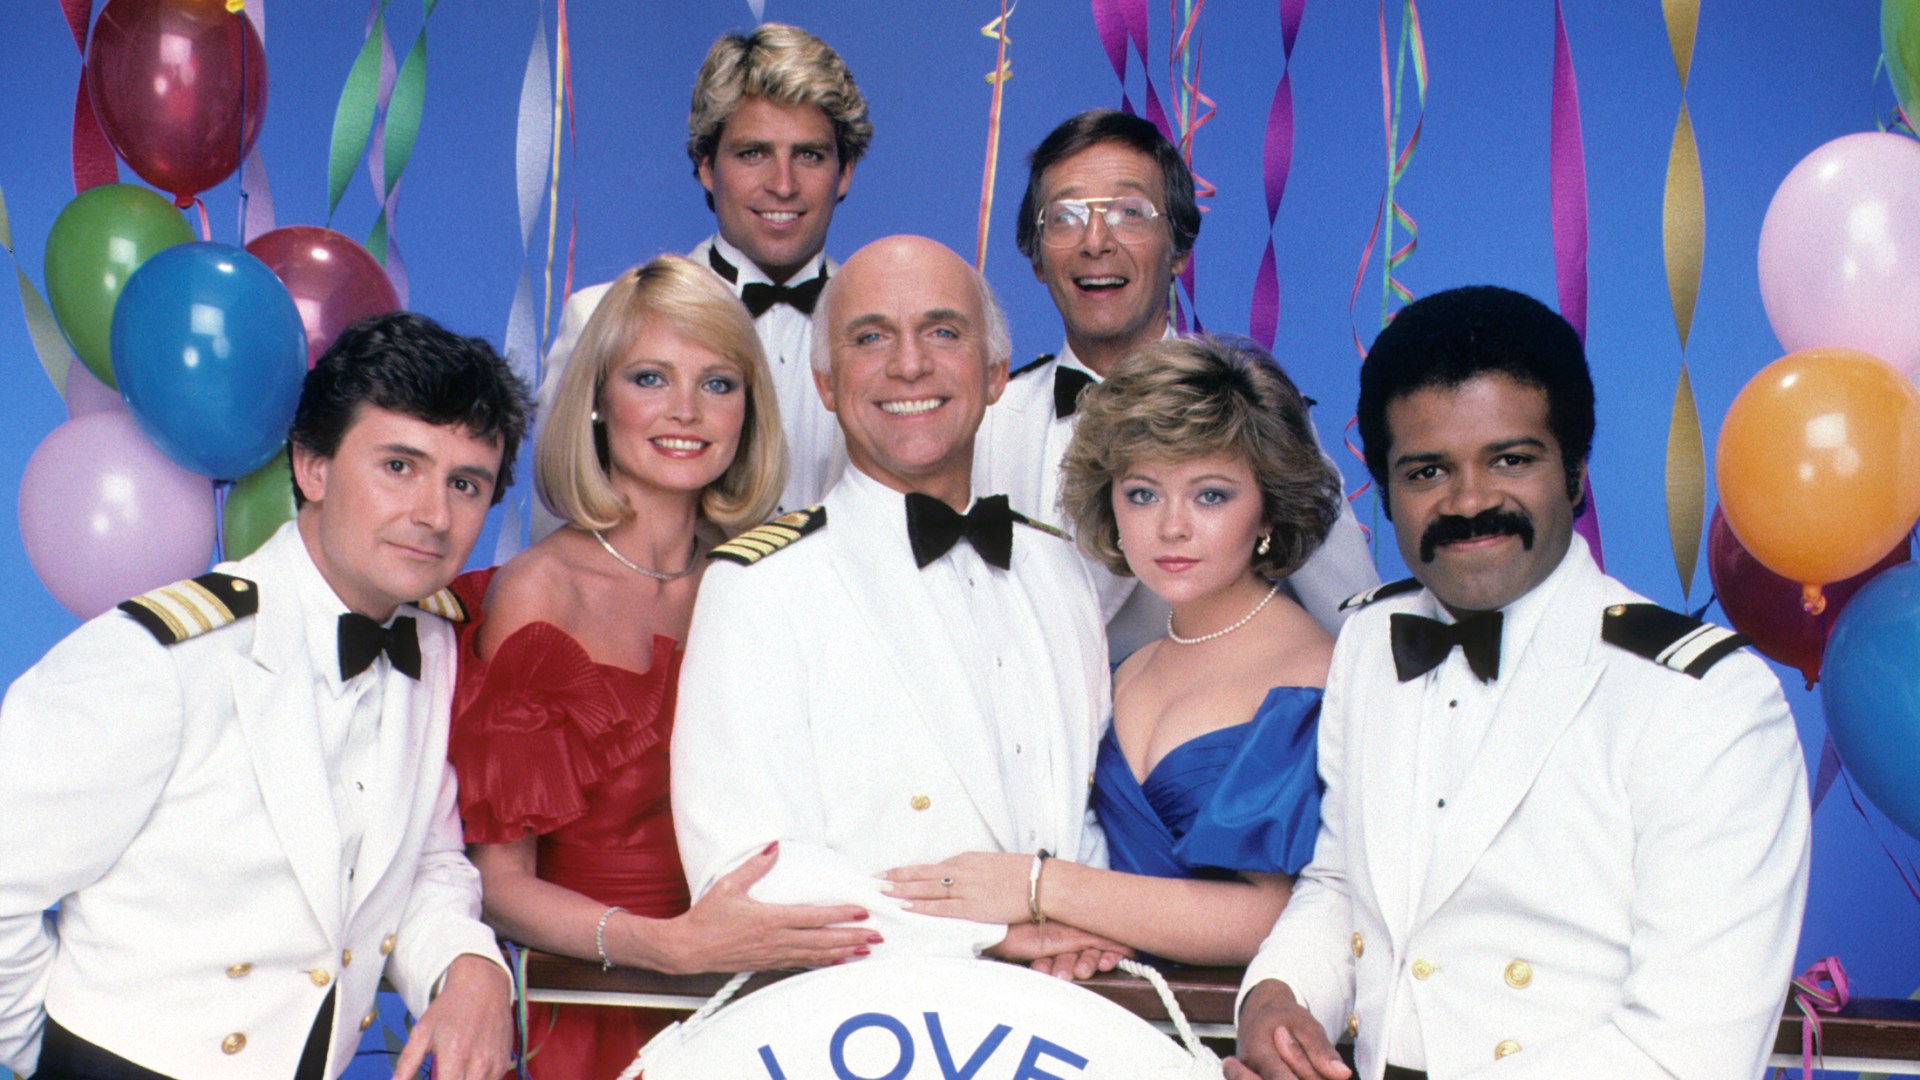 Inside the 'Love Boat' Cast's Close Bond After 40Plus Years